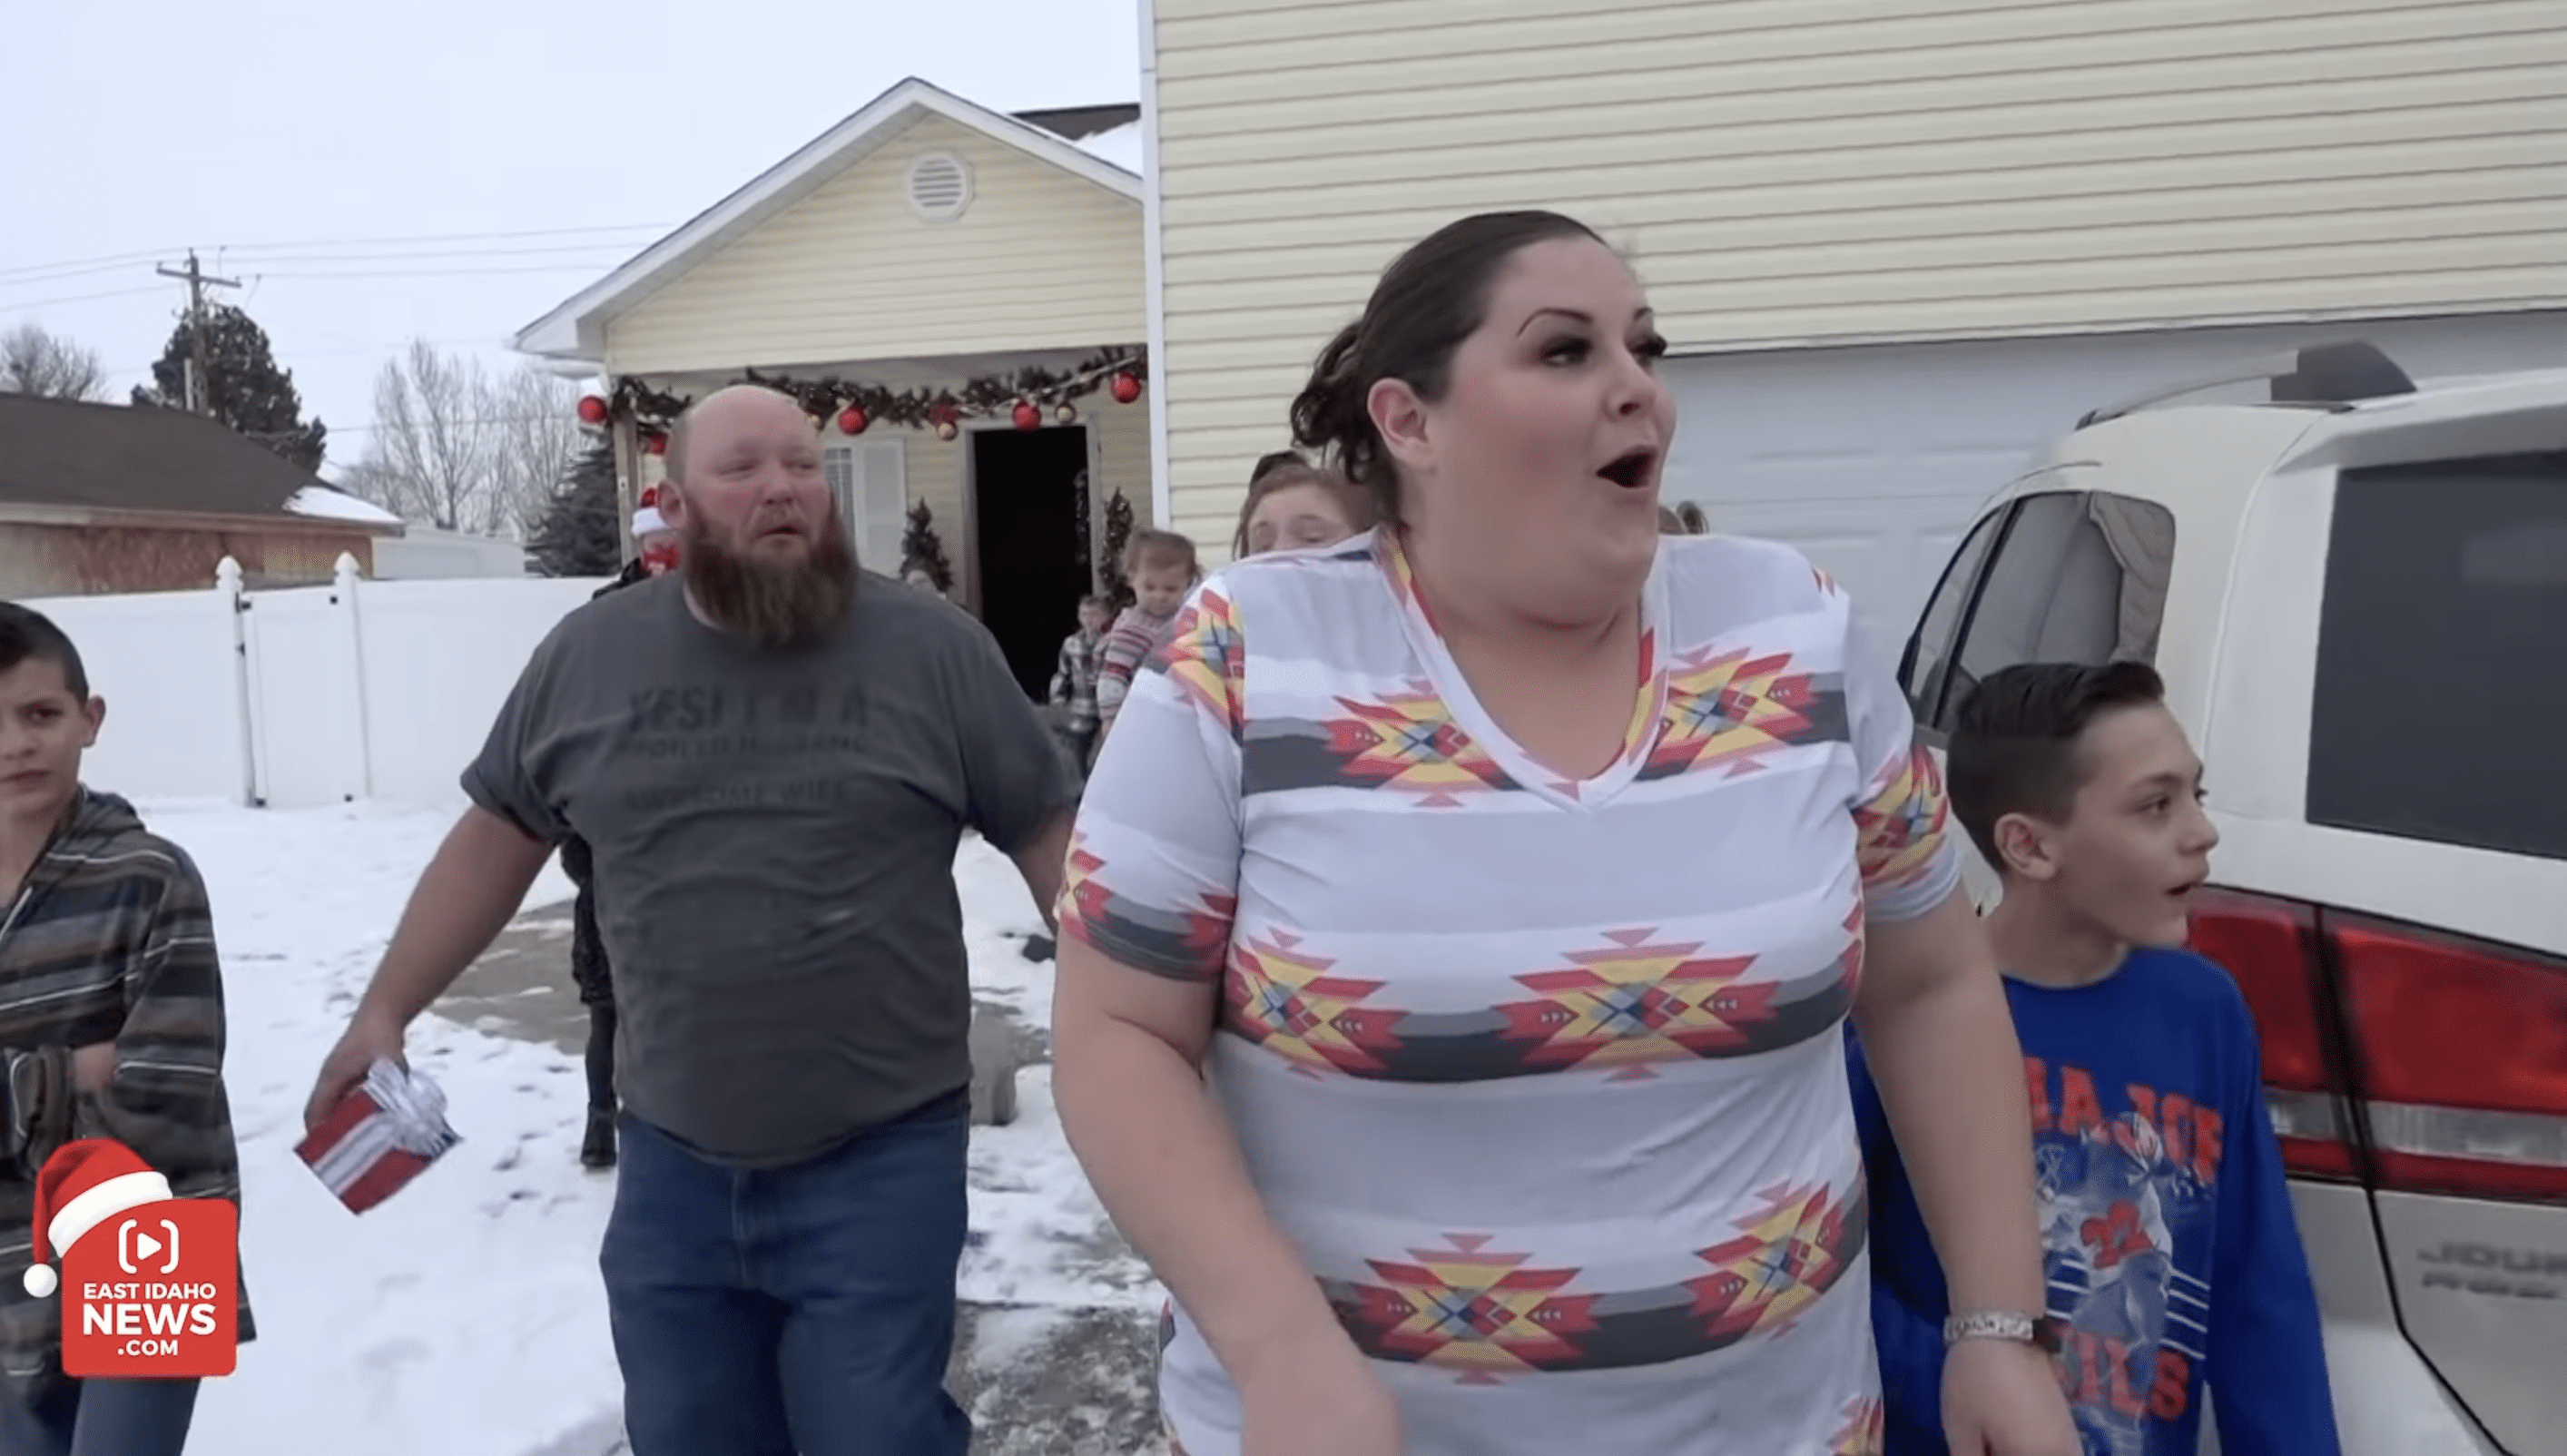 Misty and Ben were shocked to see a brand new van in their driveway. | Photo: YouTube.com/East Idaho News